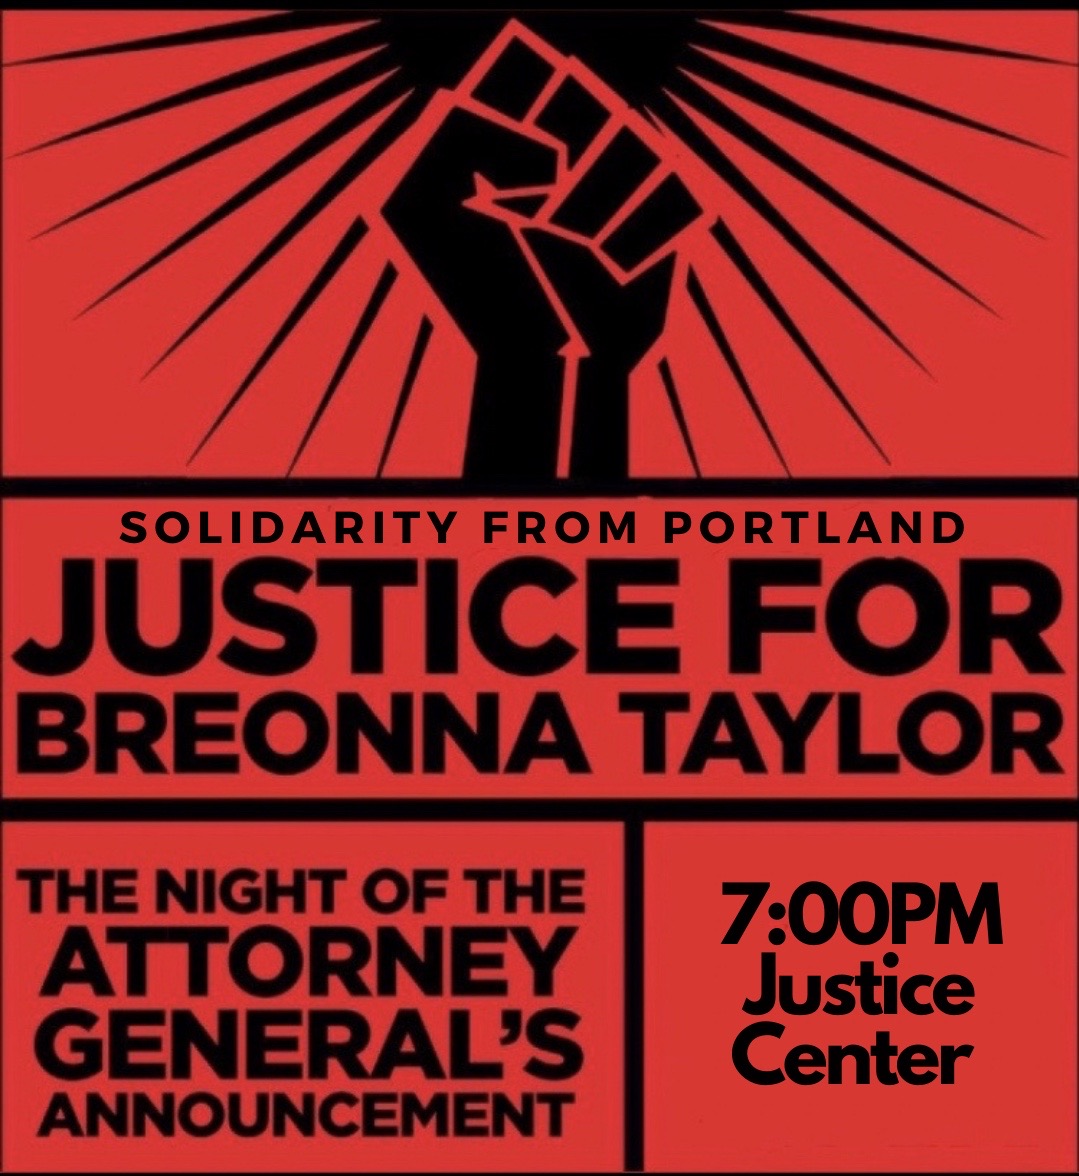 Tonight #pdxprotest shows solidarity with #Louisvilleprotest demanding #JusticeforBreonnaTalyor